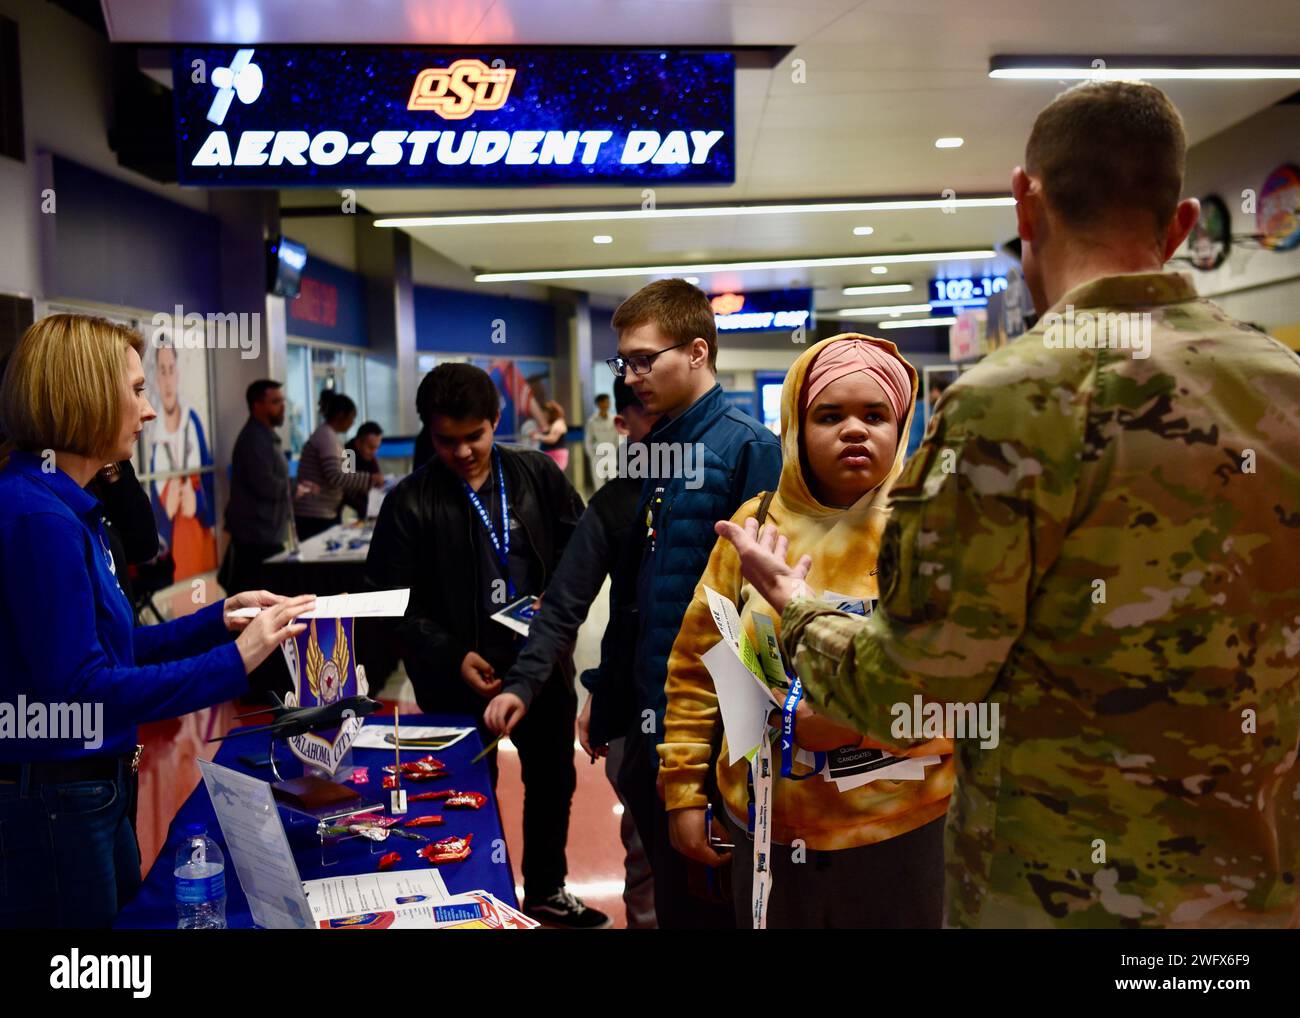 OKLAHOMA CITY —Col Jeffrey Anderson, right, deputy commander of the Oklahoma City Air Logistics Complex, and Abbey Charlow, left, a member of the OC-ALC community engagement & outreach team, engage with high school students at the OC-ALC informational booth during the OKC Thunder’s Aero-Student Day at the Paycom Center Jan. 23. More than 450 high school students attended the event to learn more about careers in the aerospace industry. Stock Photo